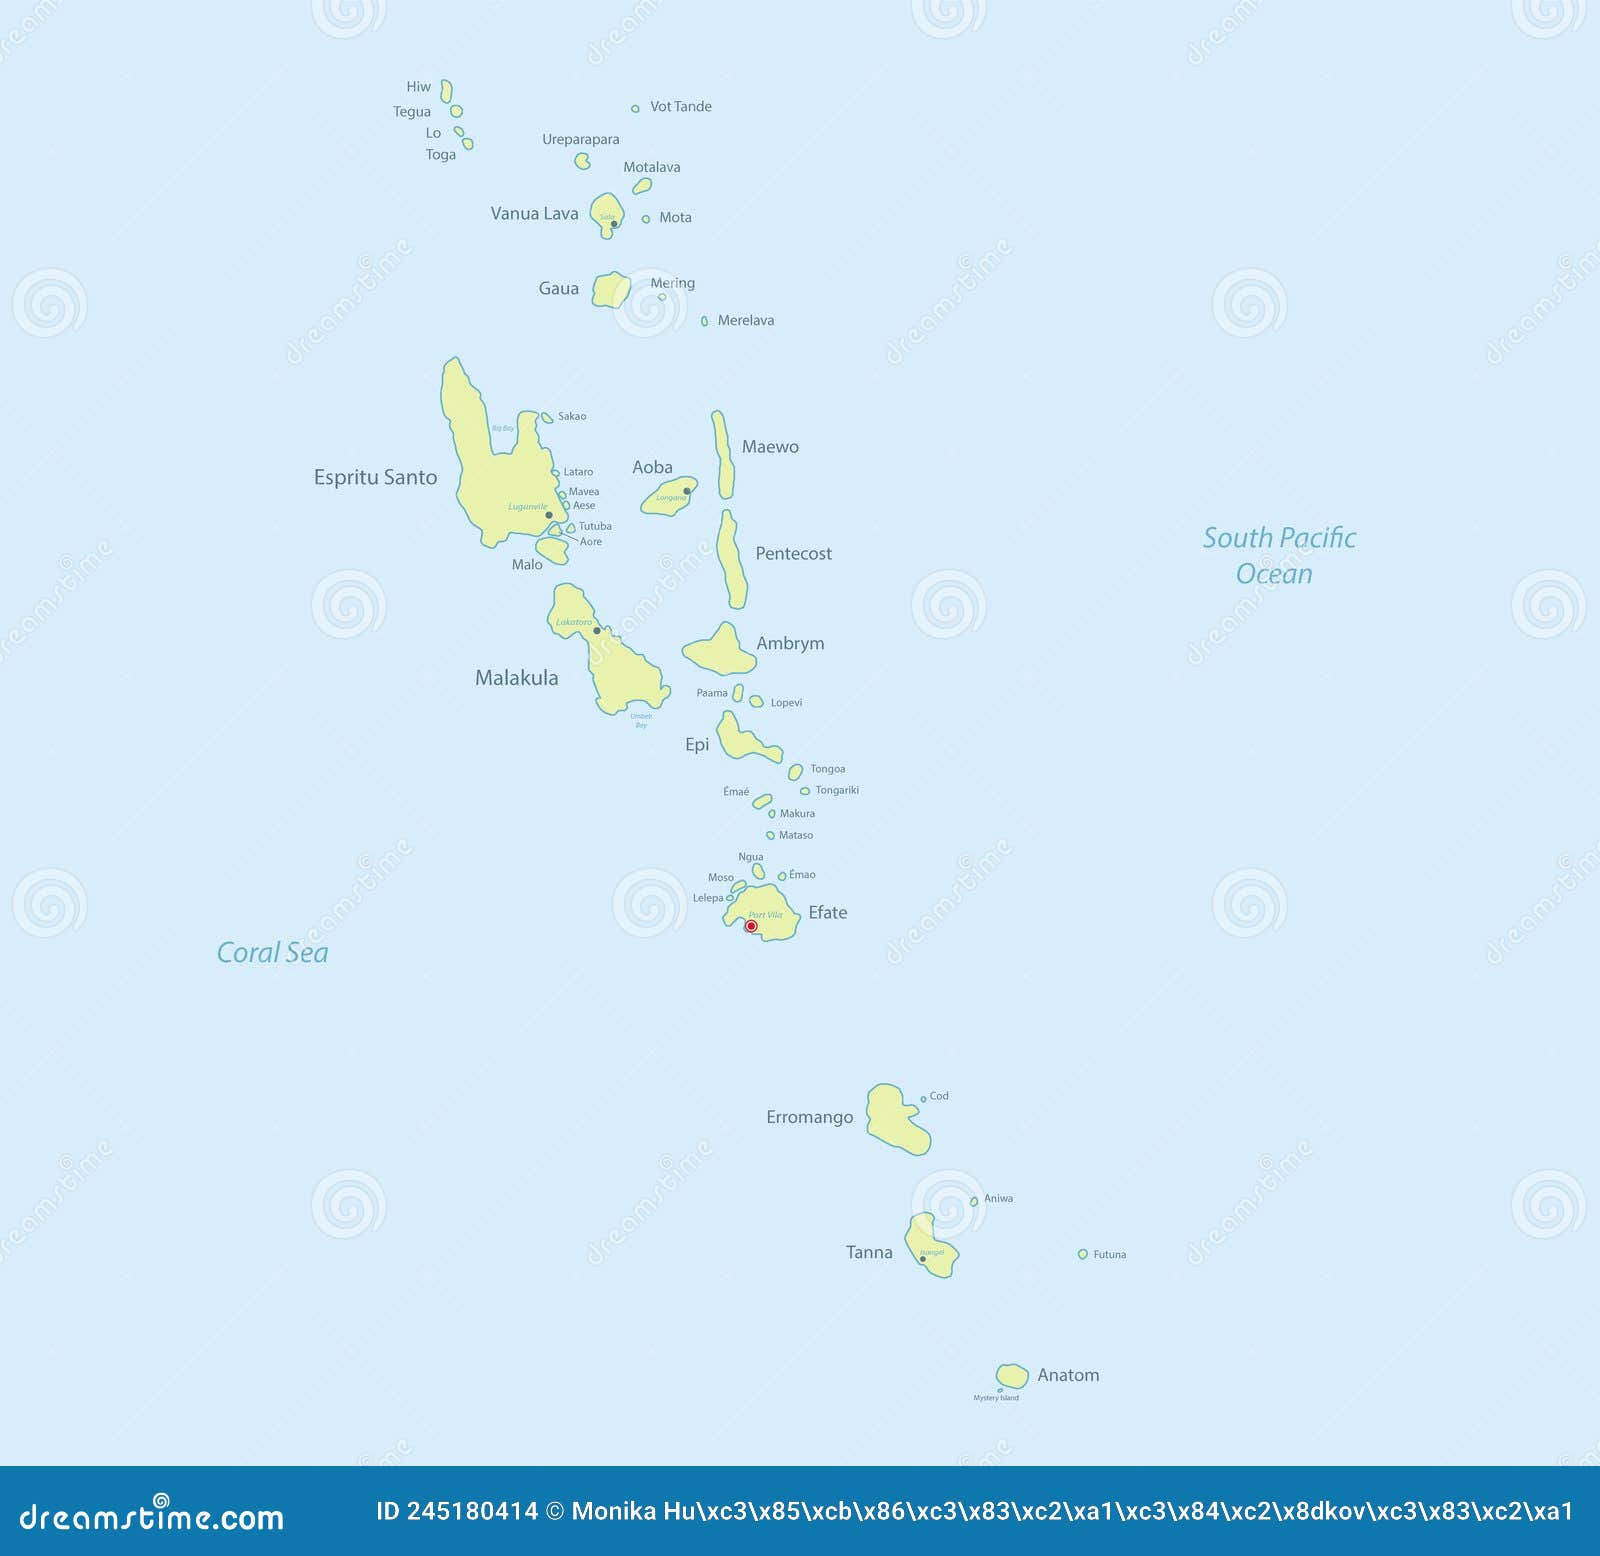 vanuatu map detailed, islands and city with names, classic maps 